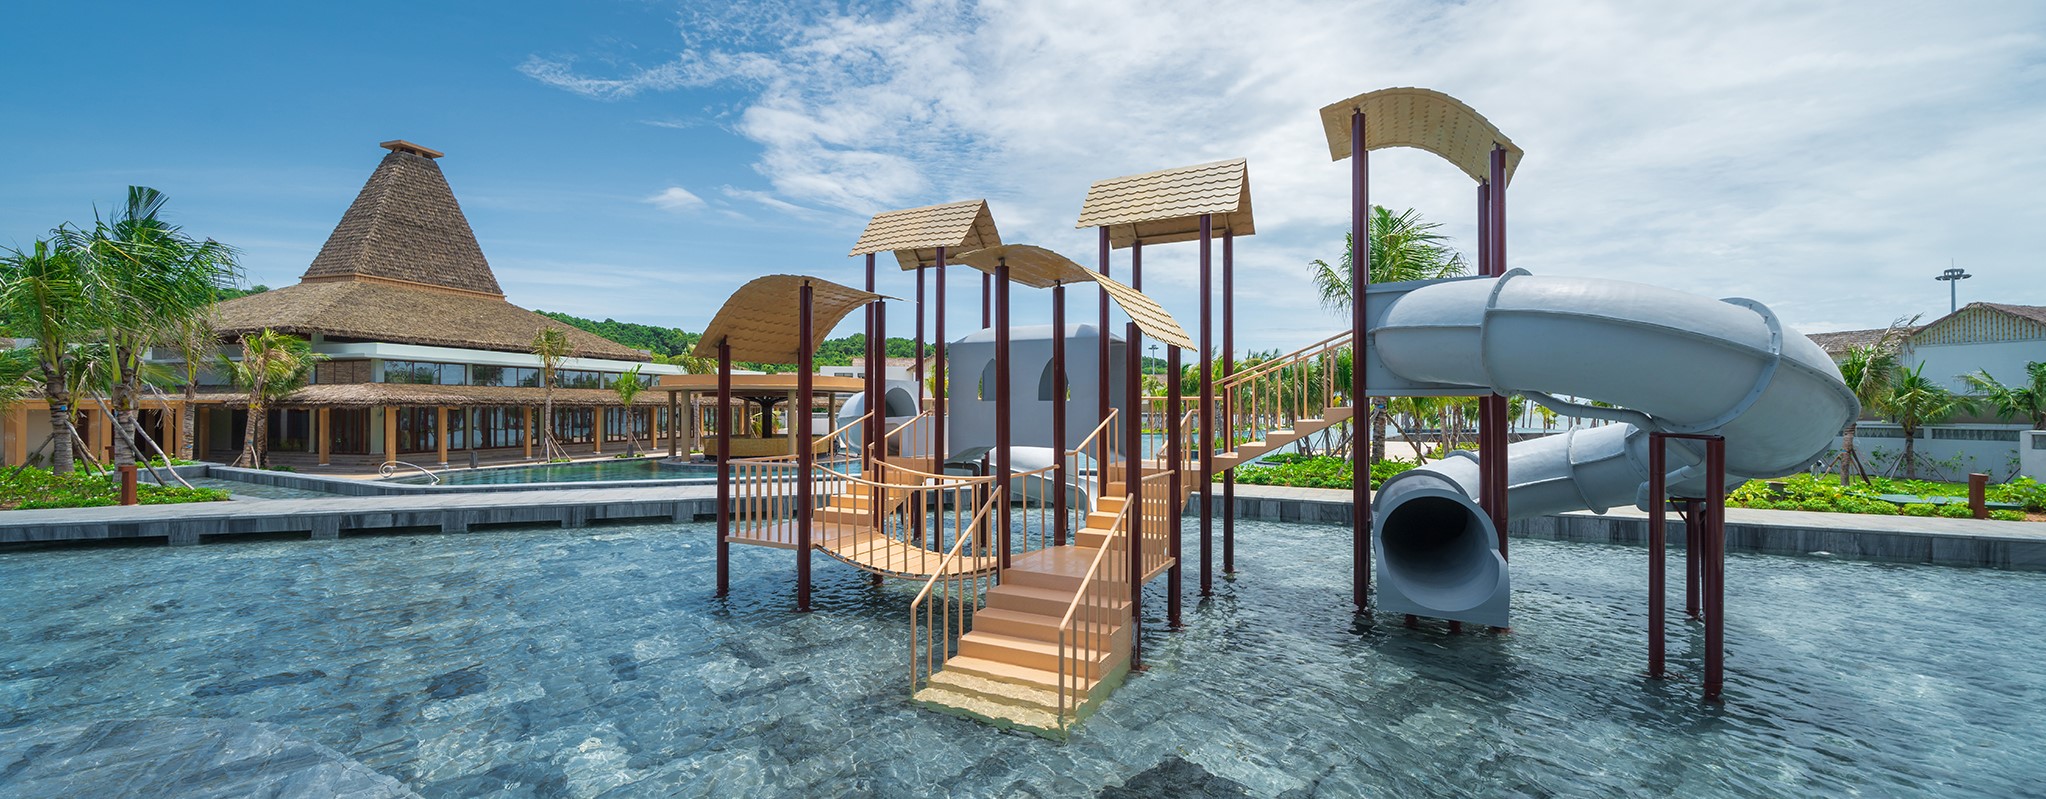 Swimming pool play area for kids at the New World Phu Quoc Resort.